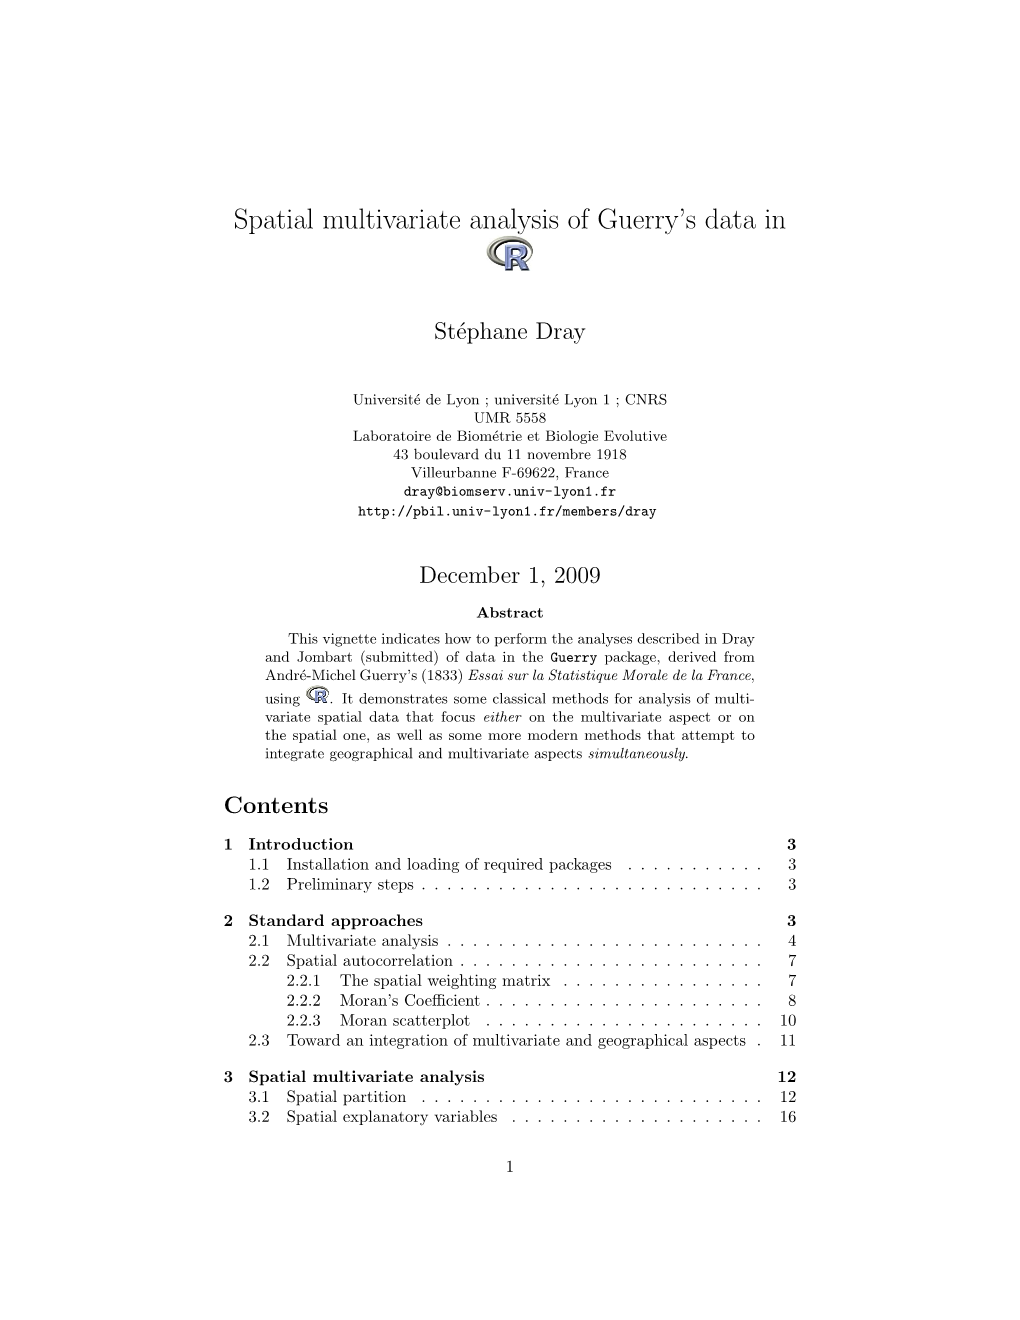 Spatial Multivariate Analysis of Guerry's Data in R